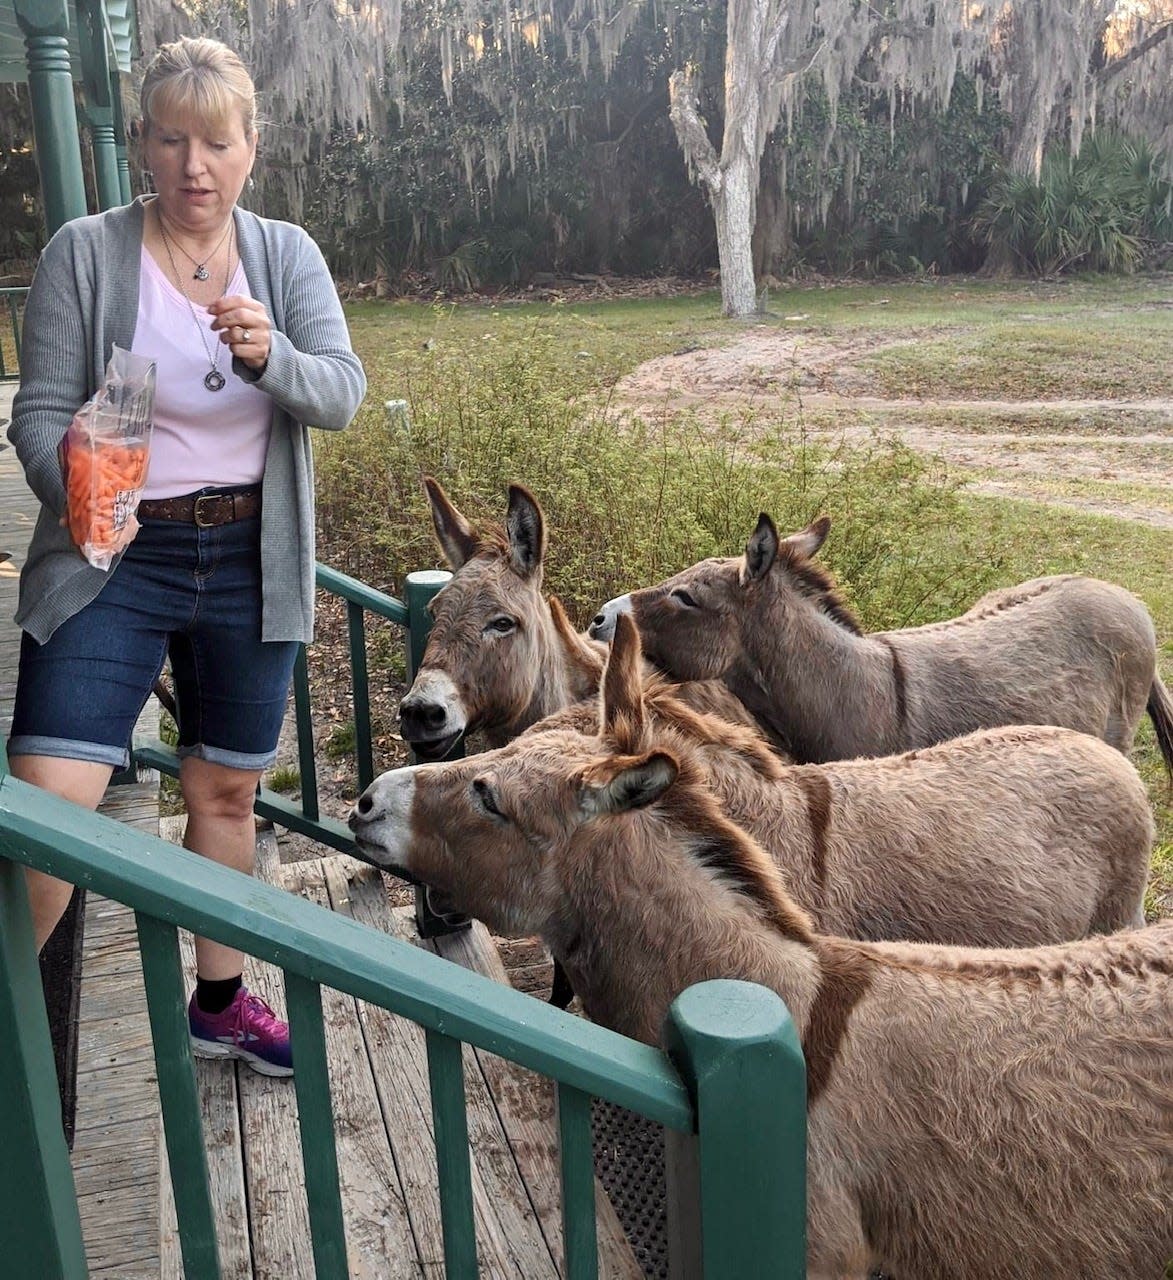 An author is greeted by the Ossabaw Island donkeys.